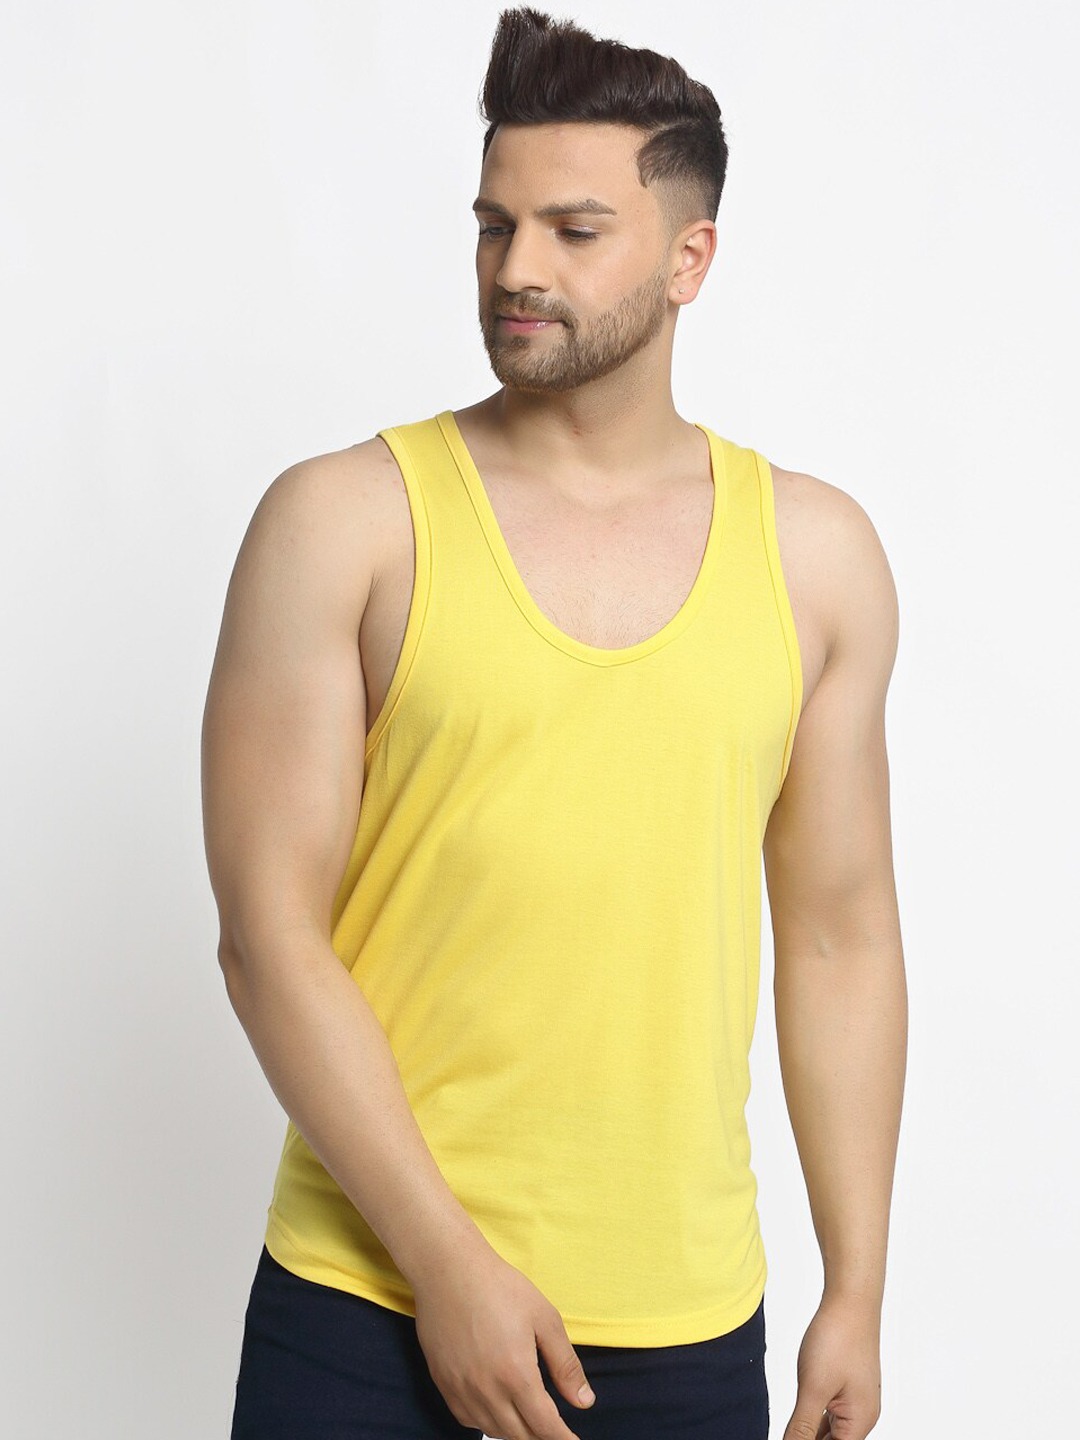 Clothing Innerwear Vests | Friskers Men Yellow Solid Pure Cotton Drop-Cut Gym Innerwear Vest - GG87689